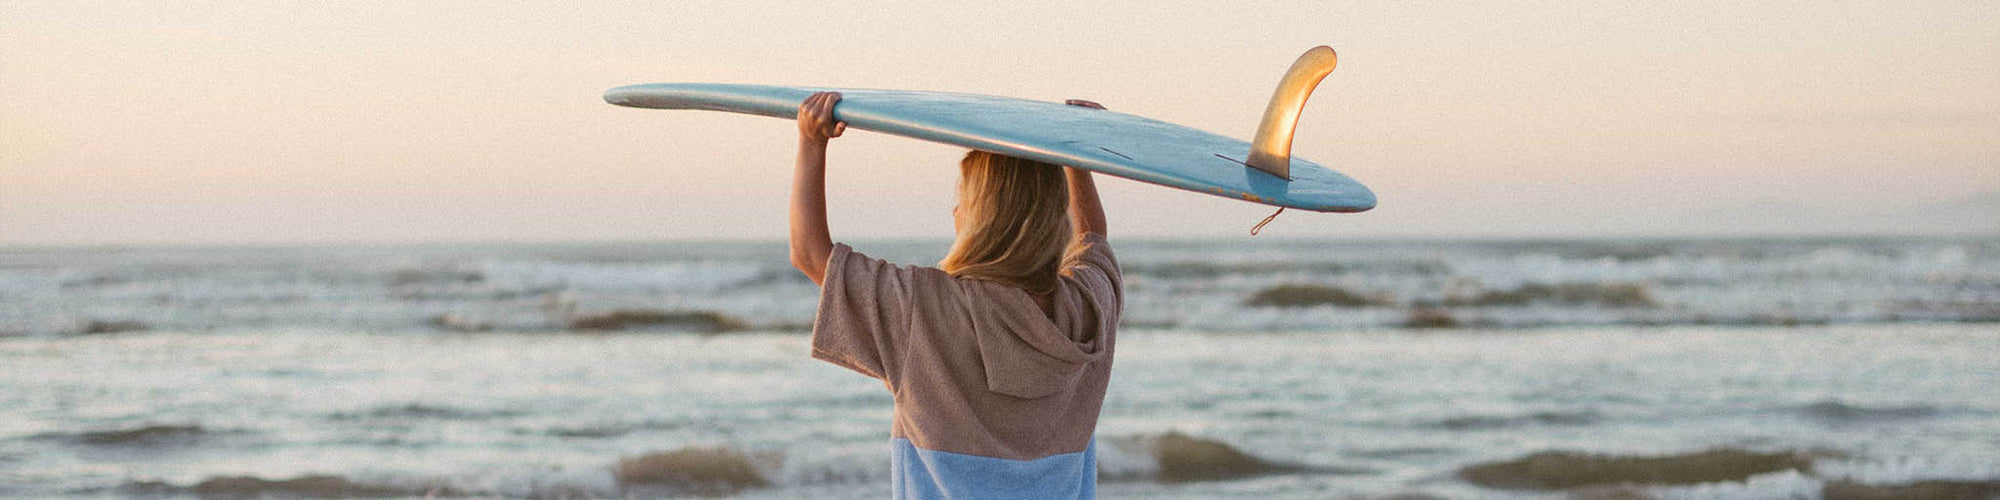 Female holding longboard surfboard in her Mahina salt towelie at sunrise on the beach looking out to the ocean